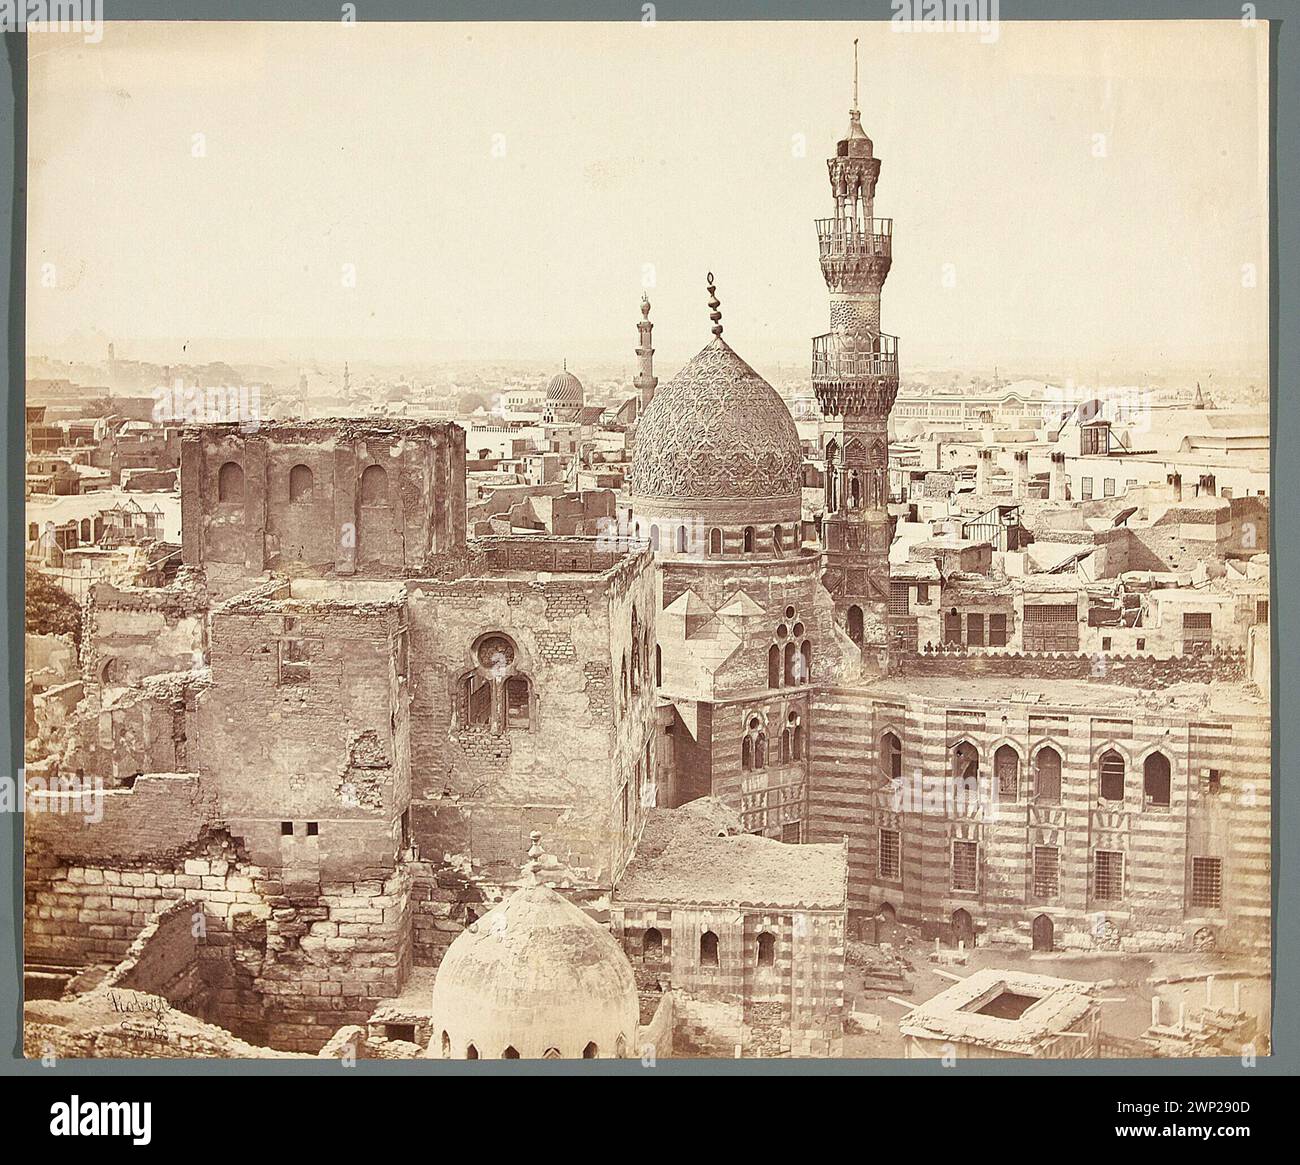 Egypt. Cairo. View of one of the mosques; Robertson, James (1813-1888), Beato, Felice (1832 -1909); 1853-1856 (1853-00-00-1856-00-00);Egypt, Kair, Orient, architecture, Islamic architecture, temple Stock Photo